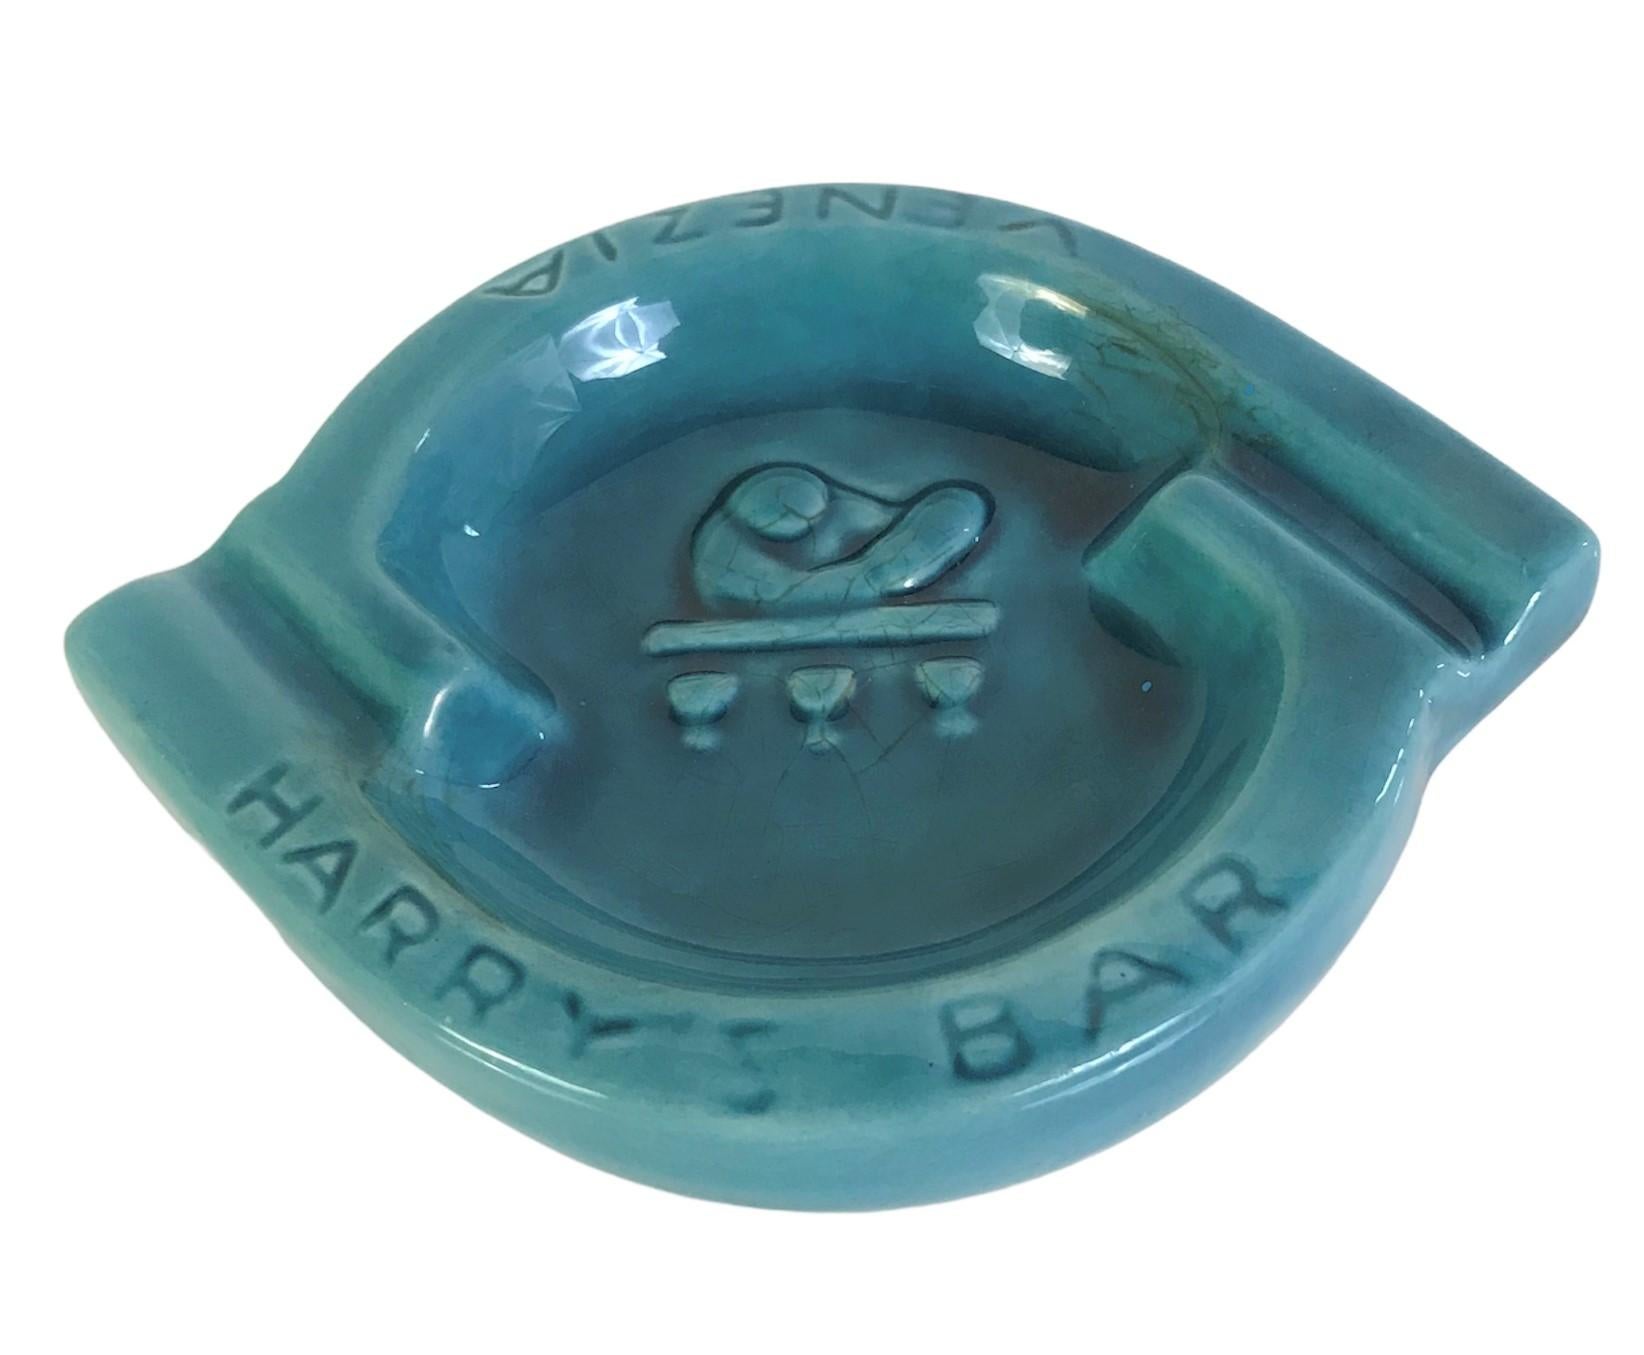 Fabulous Mid-Century Modern Ceramic Ashtray from the world-famous Harry’s Bar, Venice.  Turquoise blue ceramic with the signature bartender design mixing cocktails in relief.  HARRY’s BAR and VENEZIA incised and Dual cigarette / cigar rests. Clearly